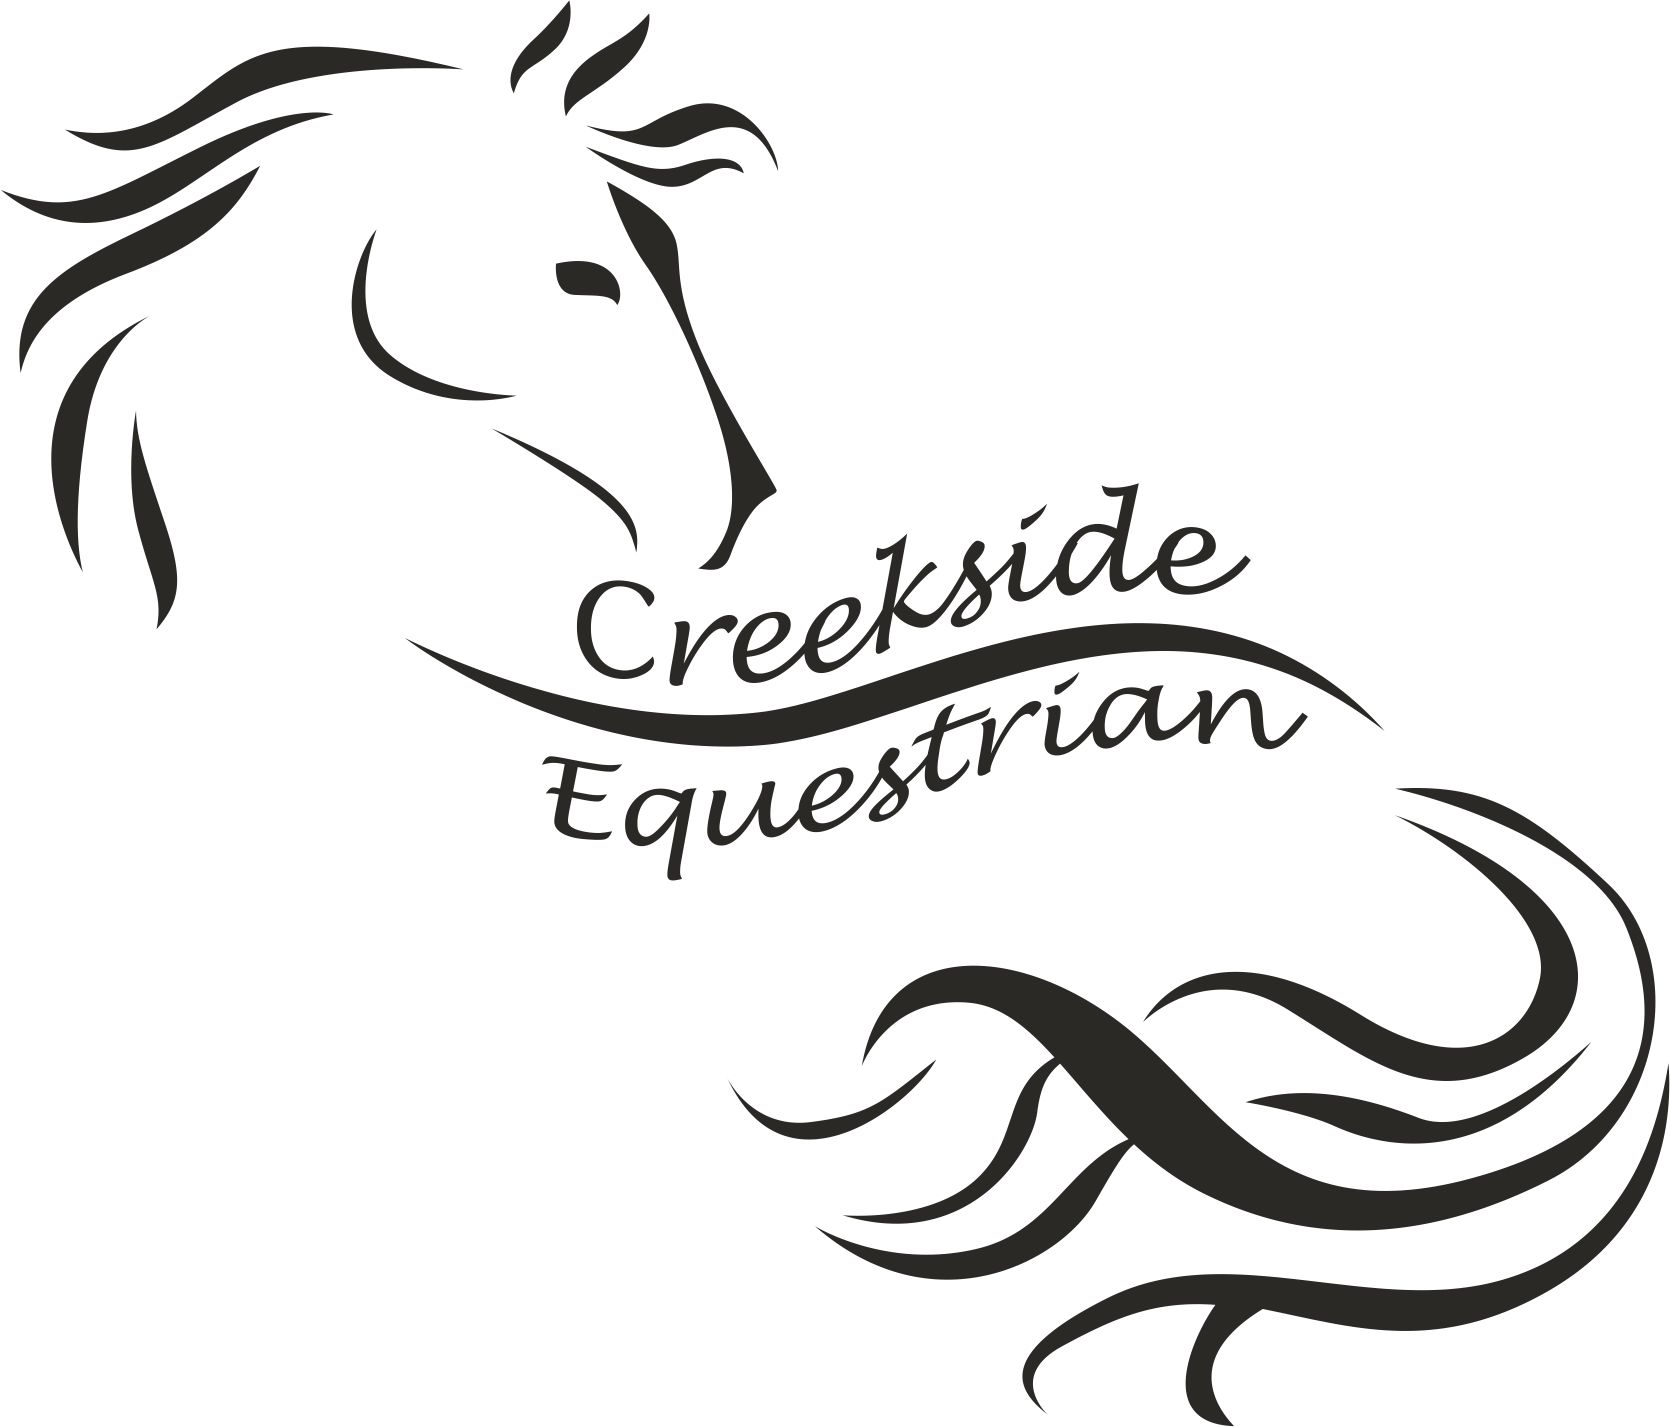 CreeksideEquestrianCo – Your Horse Is Our Priority